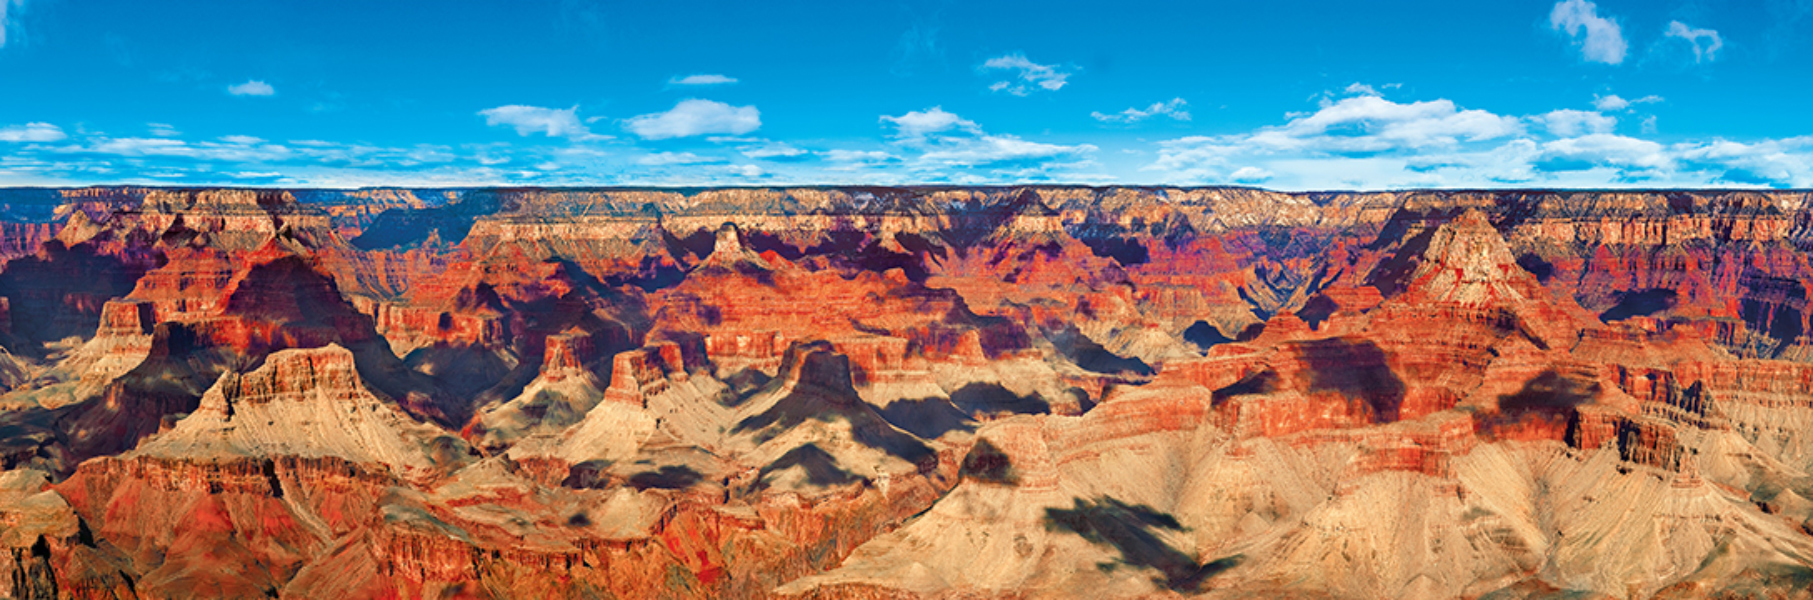 Grand Canyon - Scratch and Dent National Parks Jigsaw Puzzle